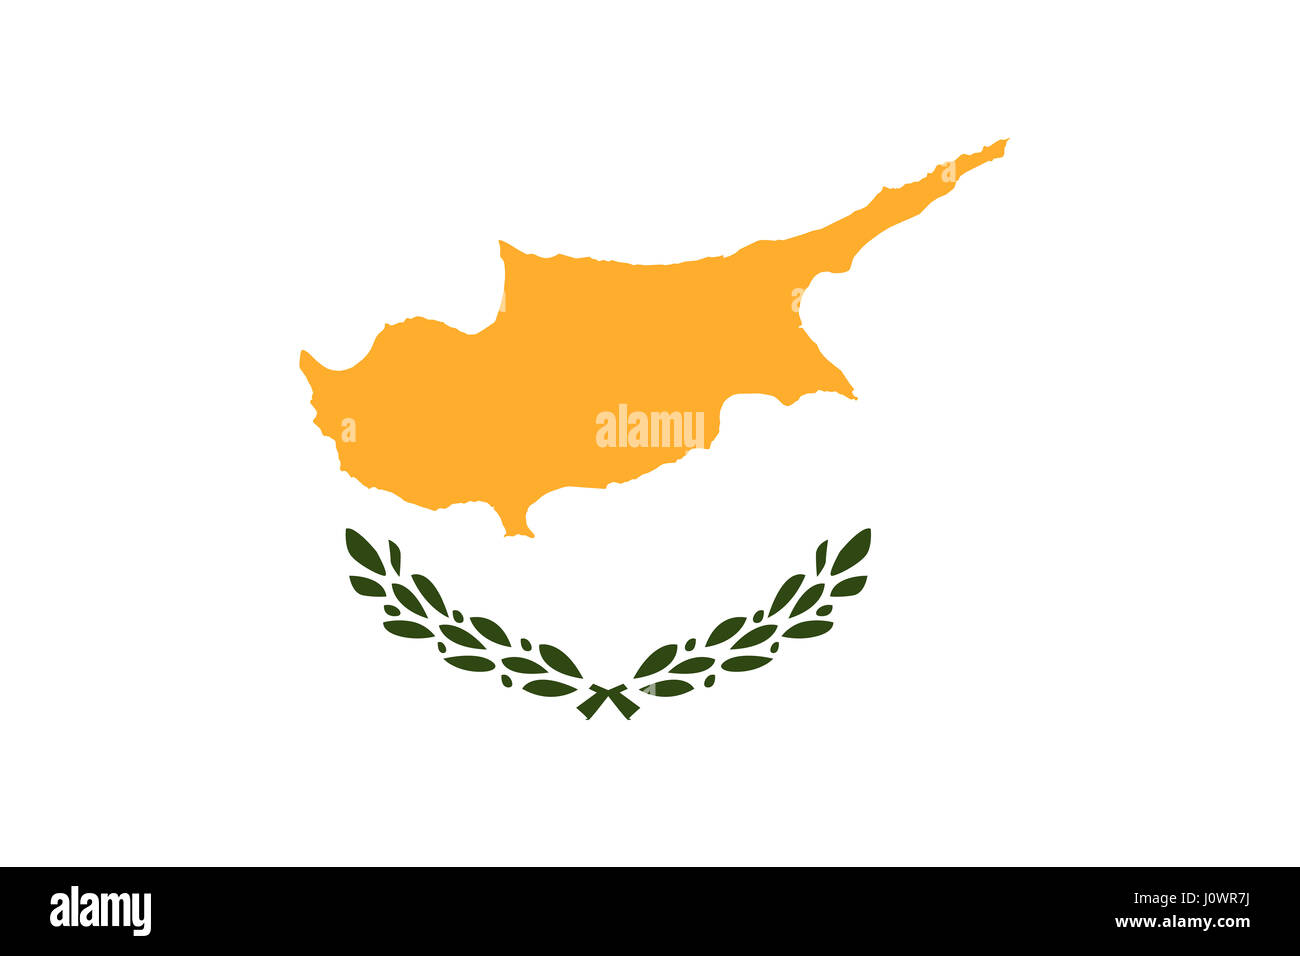 Illustration of the national flag of Cyprus Stock Photo